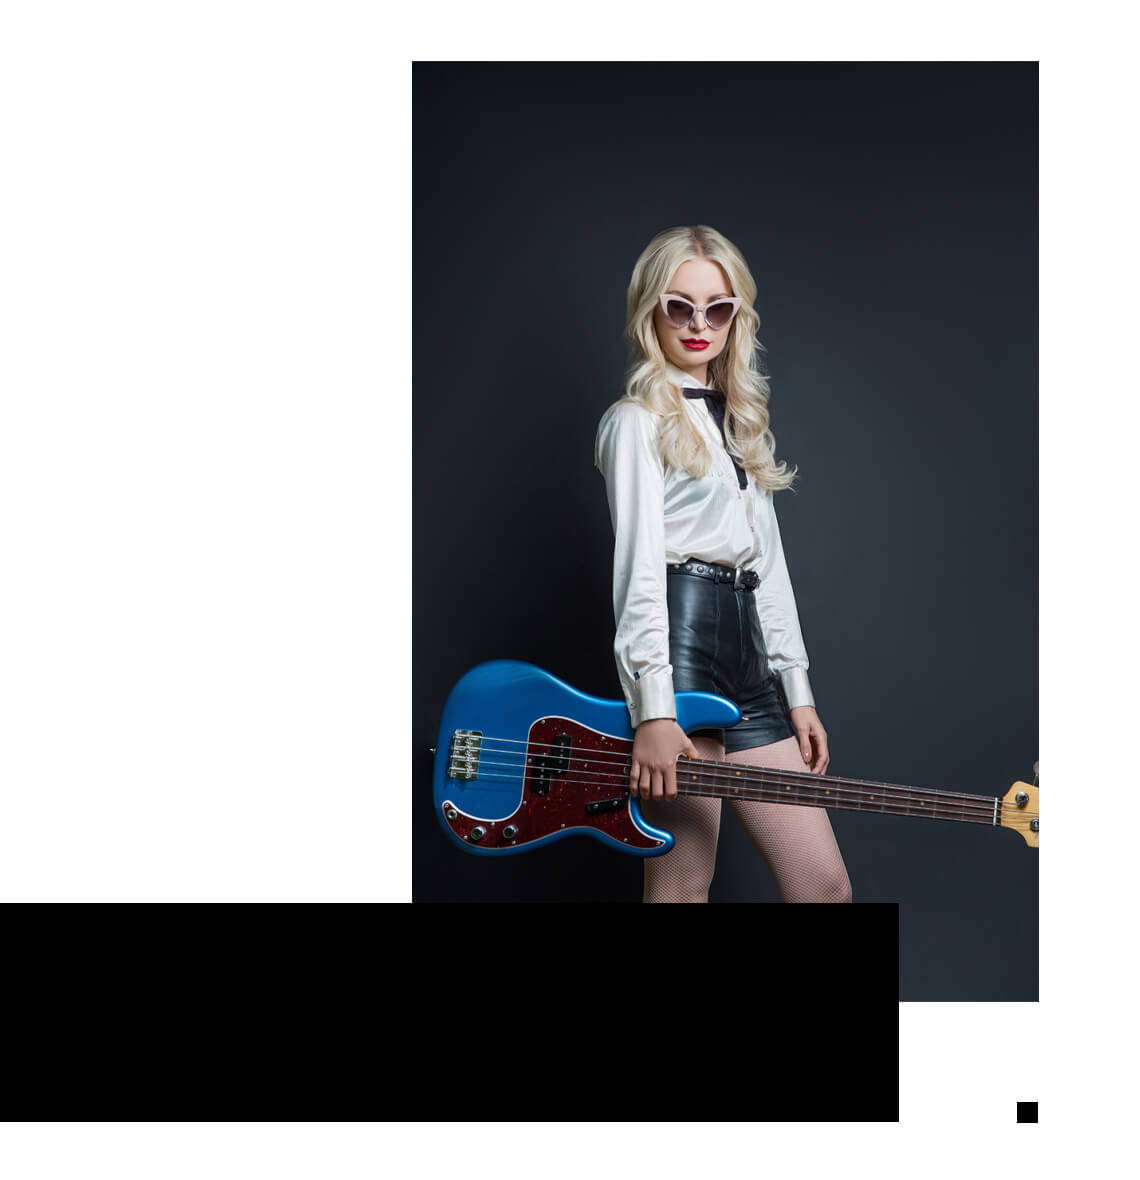 Jennie Vee with bass guitar while wearing her collaboration sunglasses by Valley Eyewear